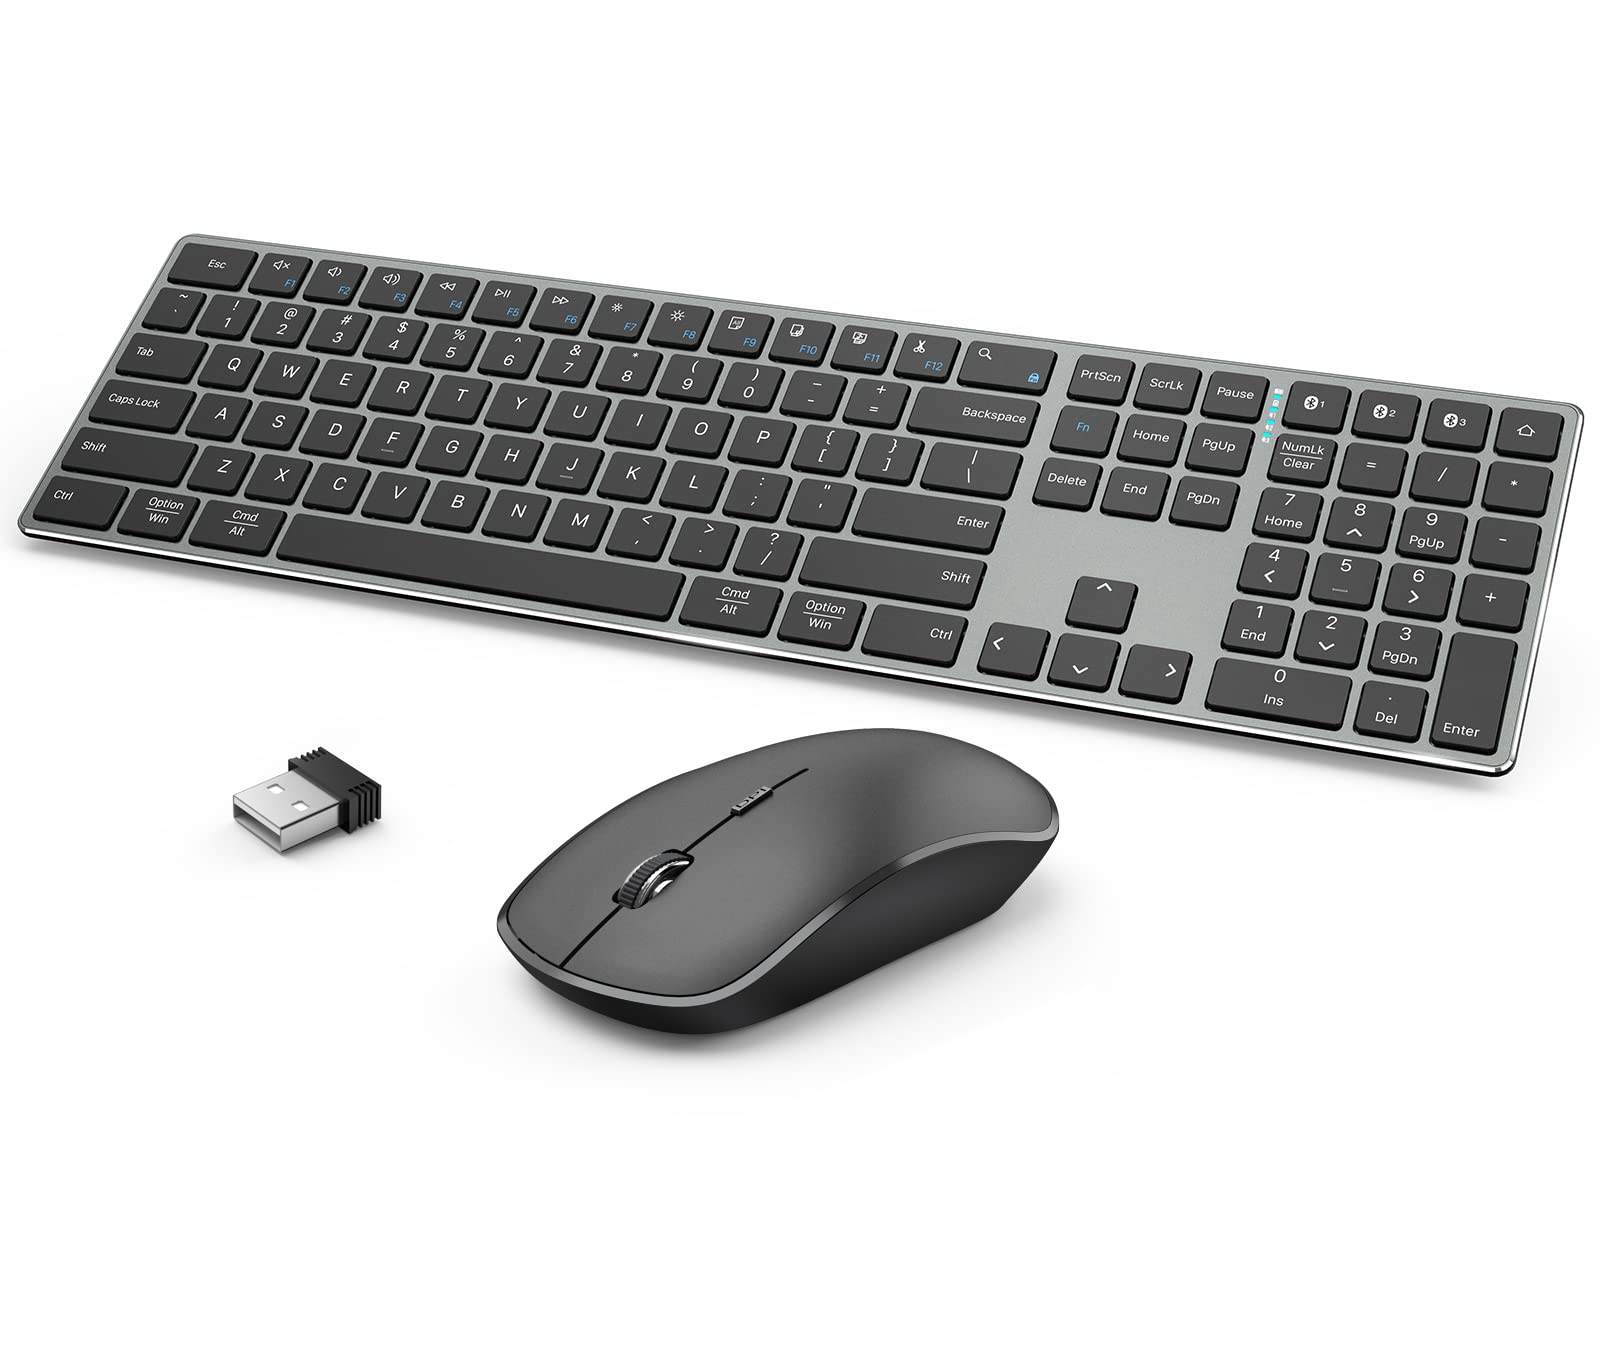 J JOYACCESS Wireless Keyboard and Mouse, Full-Size Rechargeable Bluetooth Keyboard with Numeric Keypad + 2.4G Ultra-Thin Wireless Silent Mouse for Desktop, Notebook, MacBook, Chromebook, PC